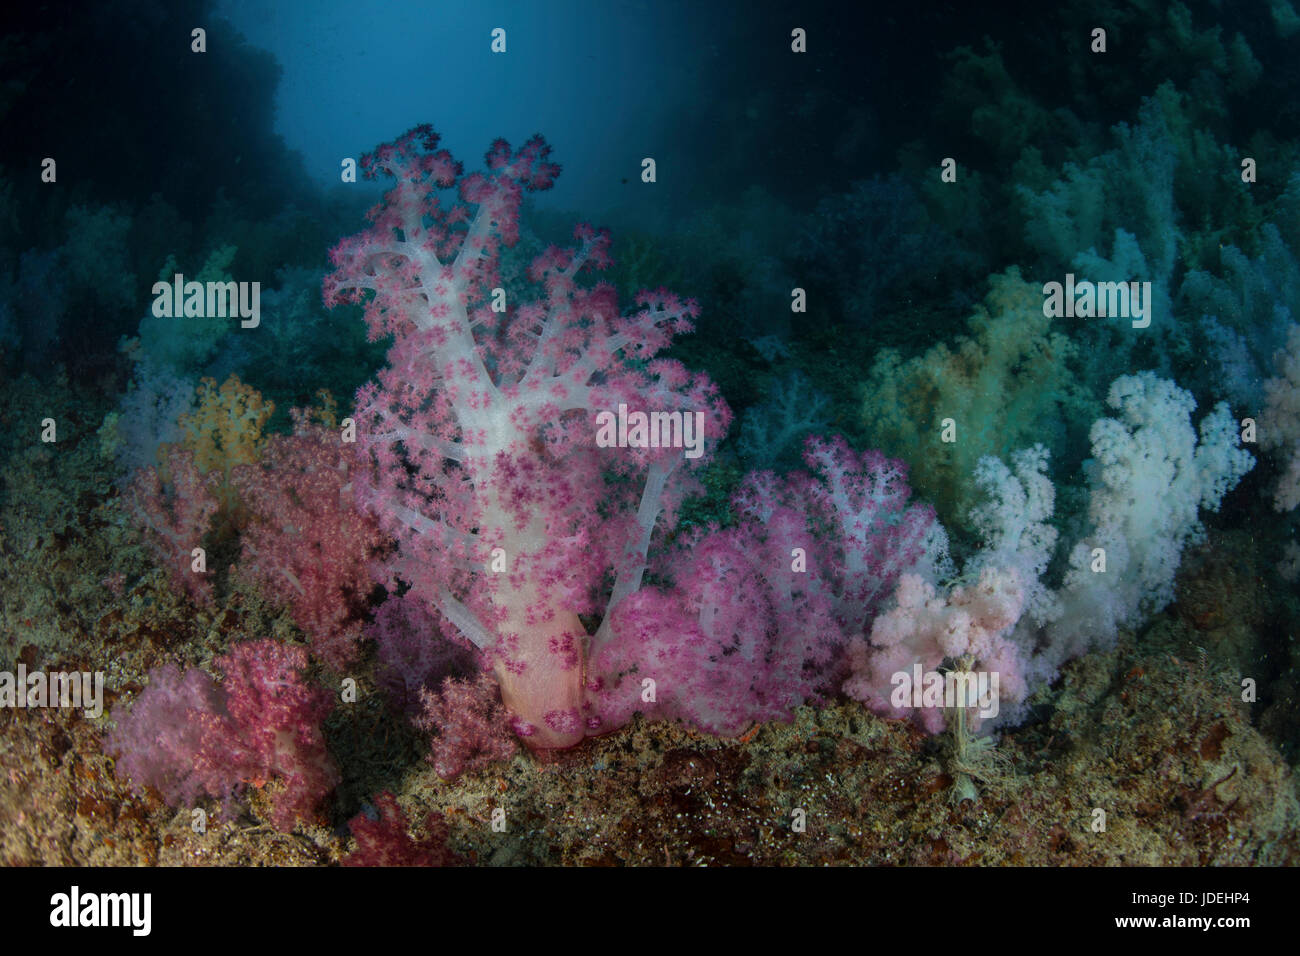 Colored Soft Corals, Dendronephthya, Micronesia, Palau Stock Photo